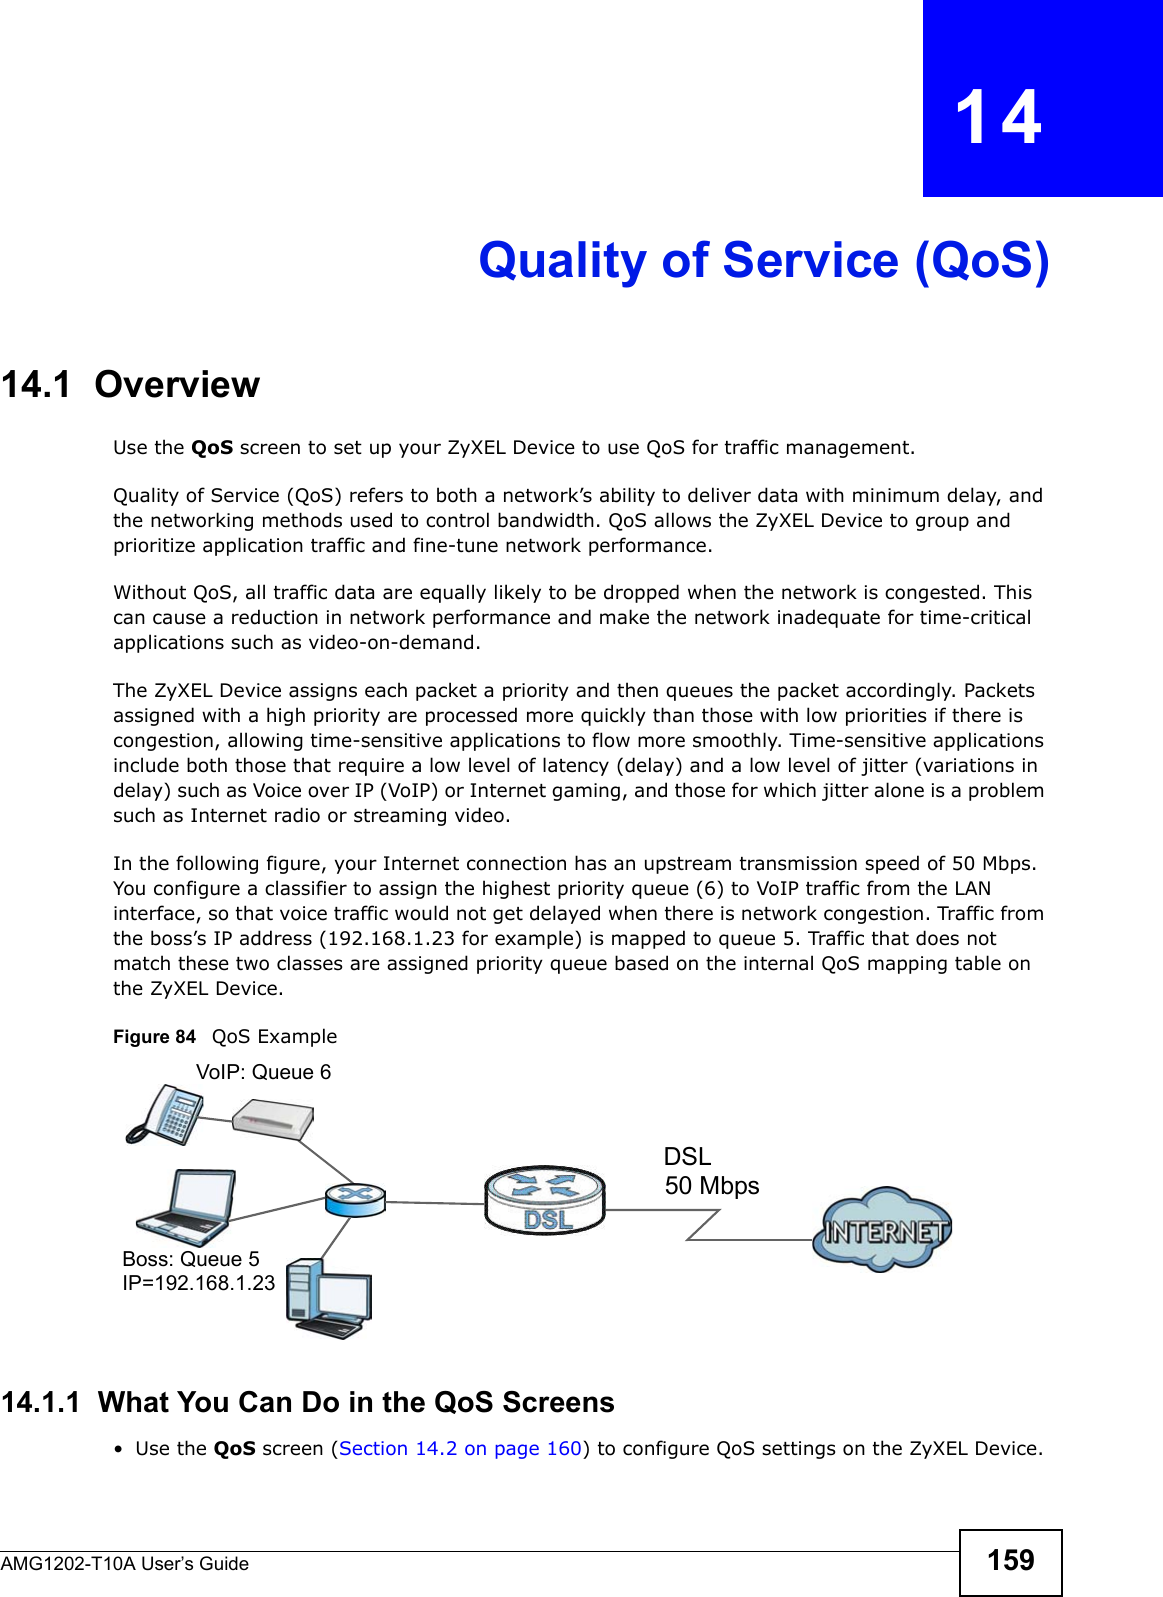 AMG1202-T10A User’s Guide 159CHAPTER   14Quality of Service (QoS)14.1  OverviewUse the QoS screen to set up your ZyXEL Device to use QoS for traffic management. Quality of Service (QoS) refers to both a network’s ability to deliver data with minimum delay, and the networking methods used to control bandwidth. QoS allows the ZyXEL Device to group and prioritize application traffic and fine-tune network performance. Without QoS, all traffic data are equally likely to be dropped when the network is congested. This can cause a reduction in network performance and make the network inadequate for time-critical applications such as video-on-demand.The ZyXEL Device assigns each packet a priority and then queues the packet accordingly. Packets assigned with a high priority are processed more quickly than those with low priorities if there is congestion, allowing time-sensitive applications to flow more smoothly. Time-sensitive applications include both those that require a low level of latency (delay) and a low level of jitter (variations in delay) such as Voice over IP (VoIP) or Internet gaming, and those for which jitter alone is a problem such as Internet radio or streaming video.In the following figure, your Internet connection has an upstream transmission speed of 50 Mbps. You configure a classifier to assign the highest priority queue (6) to VoIP traffic from the LAN interface, so that voice traffic would not get delayed when there is network congestion. Traffic from the boss’s IP address (192.168.1.23 for example) is mapped to queue 5. Traffic that does not match these two classes are assigned priority queue based on the internal QoS mapping table on the ZyXEL Device.Figure 84   QoS Example14.1.1  What You Can Do in the QoS Screens•Use the QoS screen (Section 14.2 on page 160) to configure QoS settings on the ZyXEL Device.50 MbpsDSLVoIP: Queue 6Boss: Queue 5IP=192.168.1.23